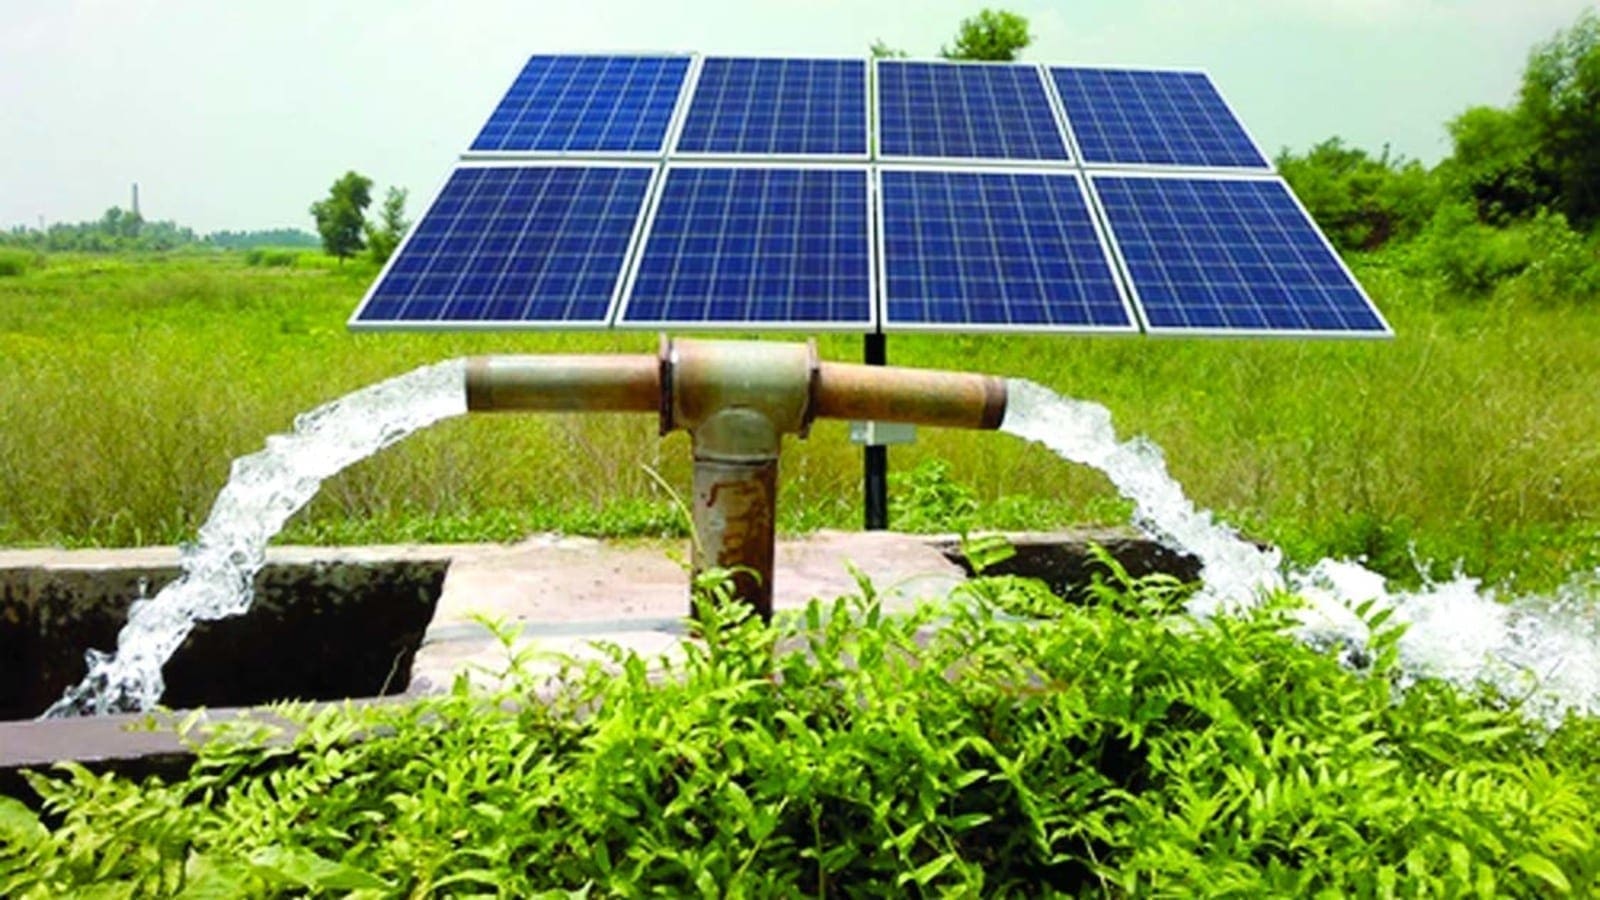 IFC partners Agricultural bank of Egypt to help farmers access financing for solar irrigation